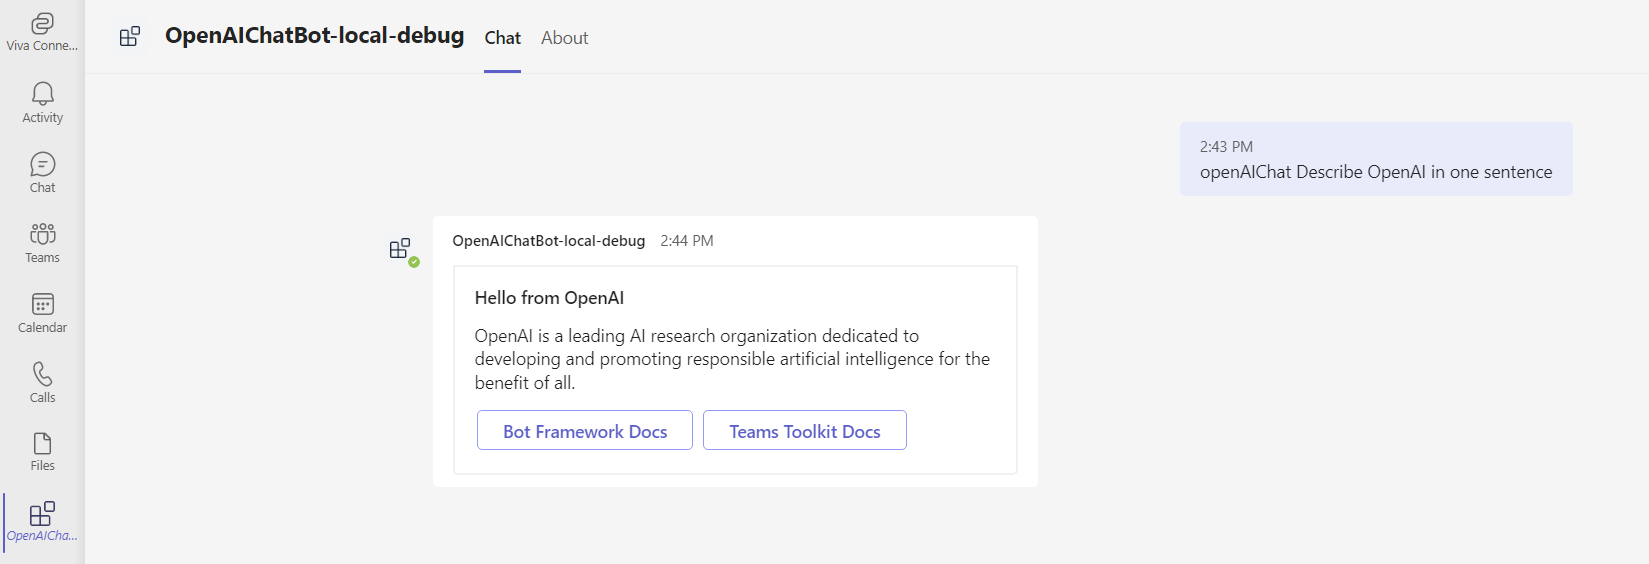 Using OpenAI APIs in Bots with Teams Toolkit